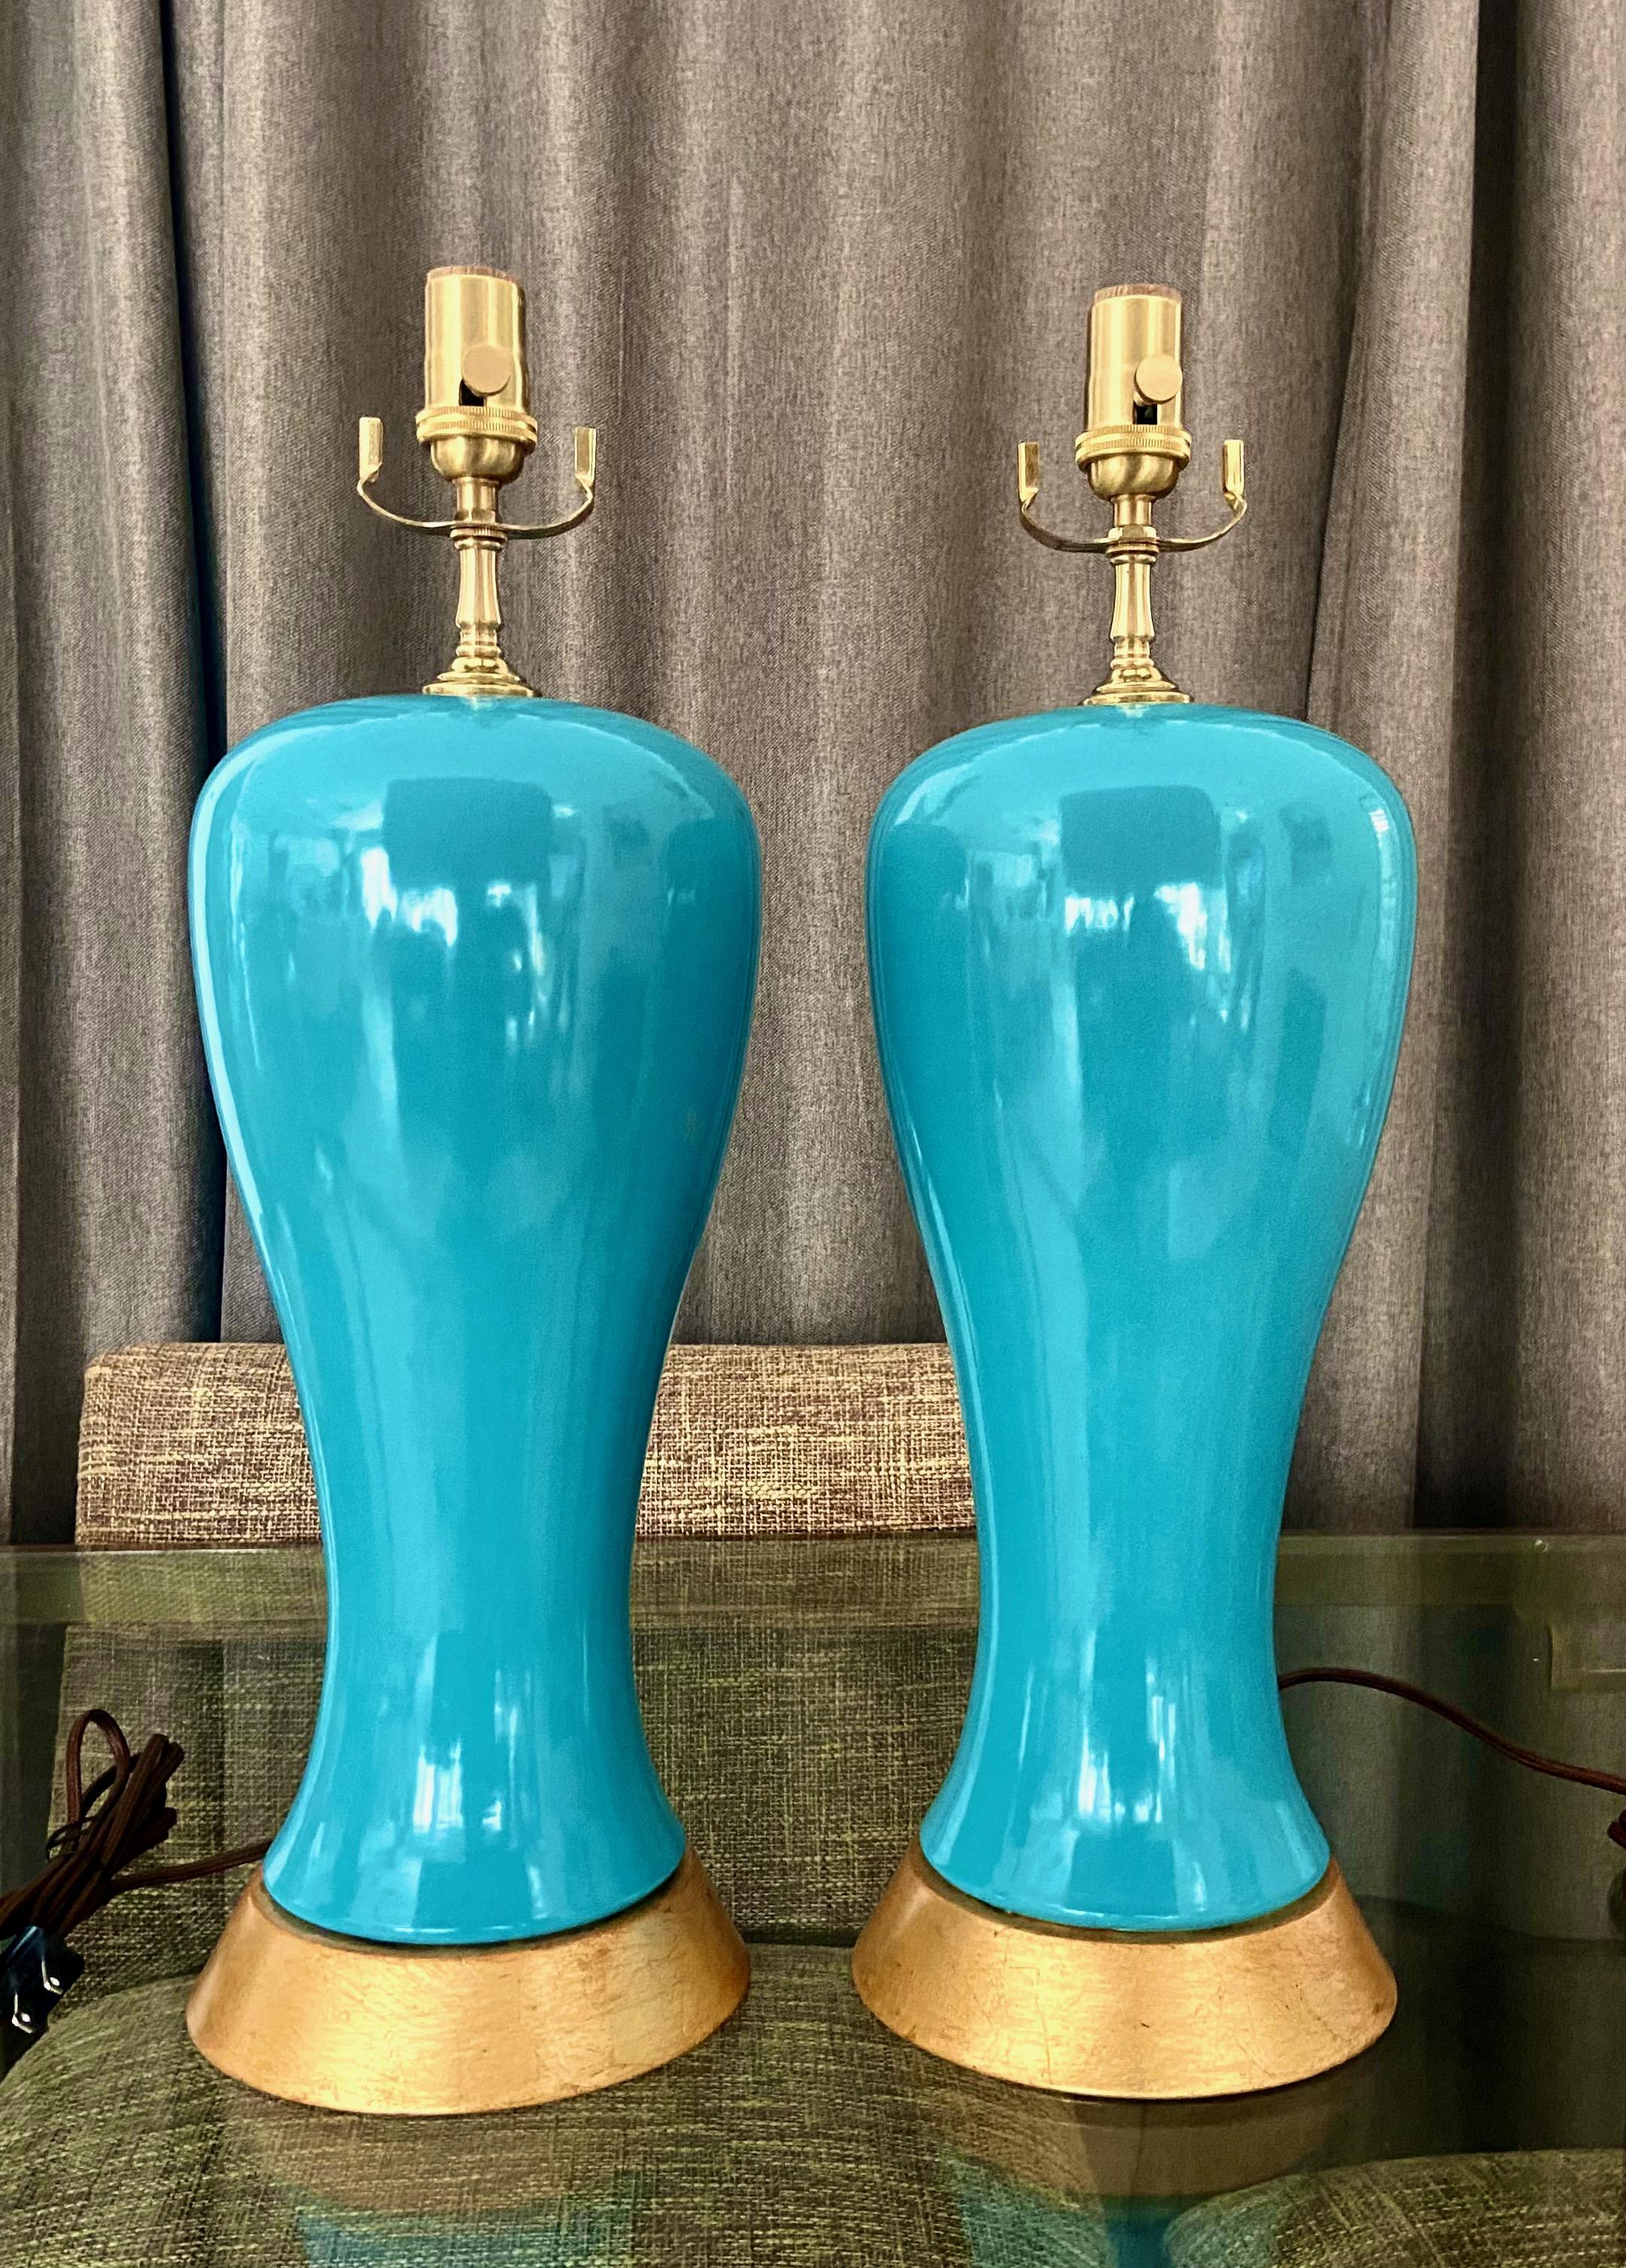 Pair of chic turquoise modern plum form ceramic table lamps on gilt metal bases. The vases have an Asian flair and fit perfectly in a modern or traditional setting. New 3 way brass sockets, fittings and rayon covered cords. Vase portion 15